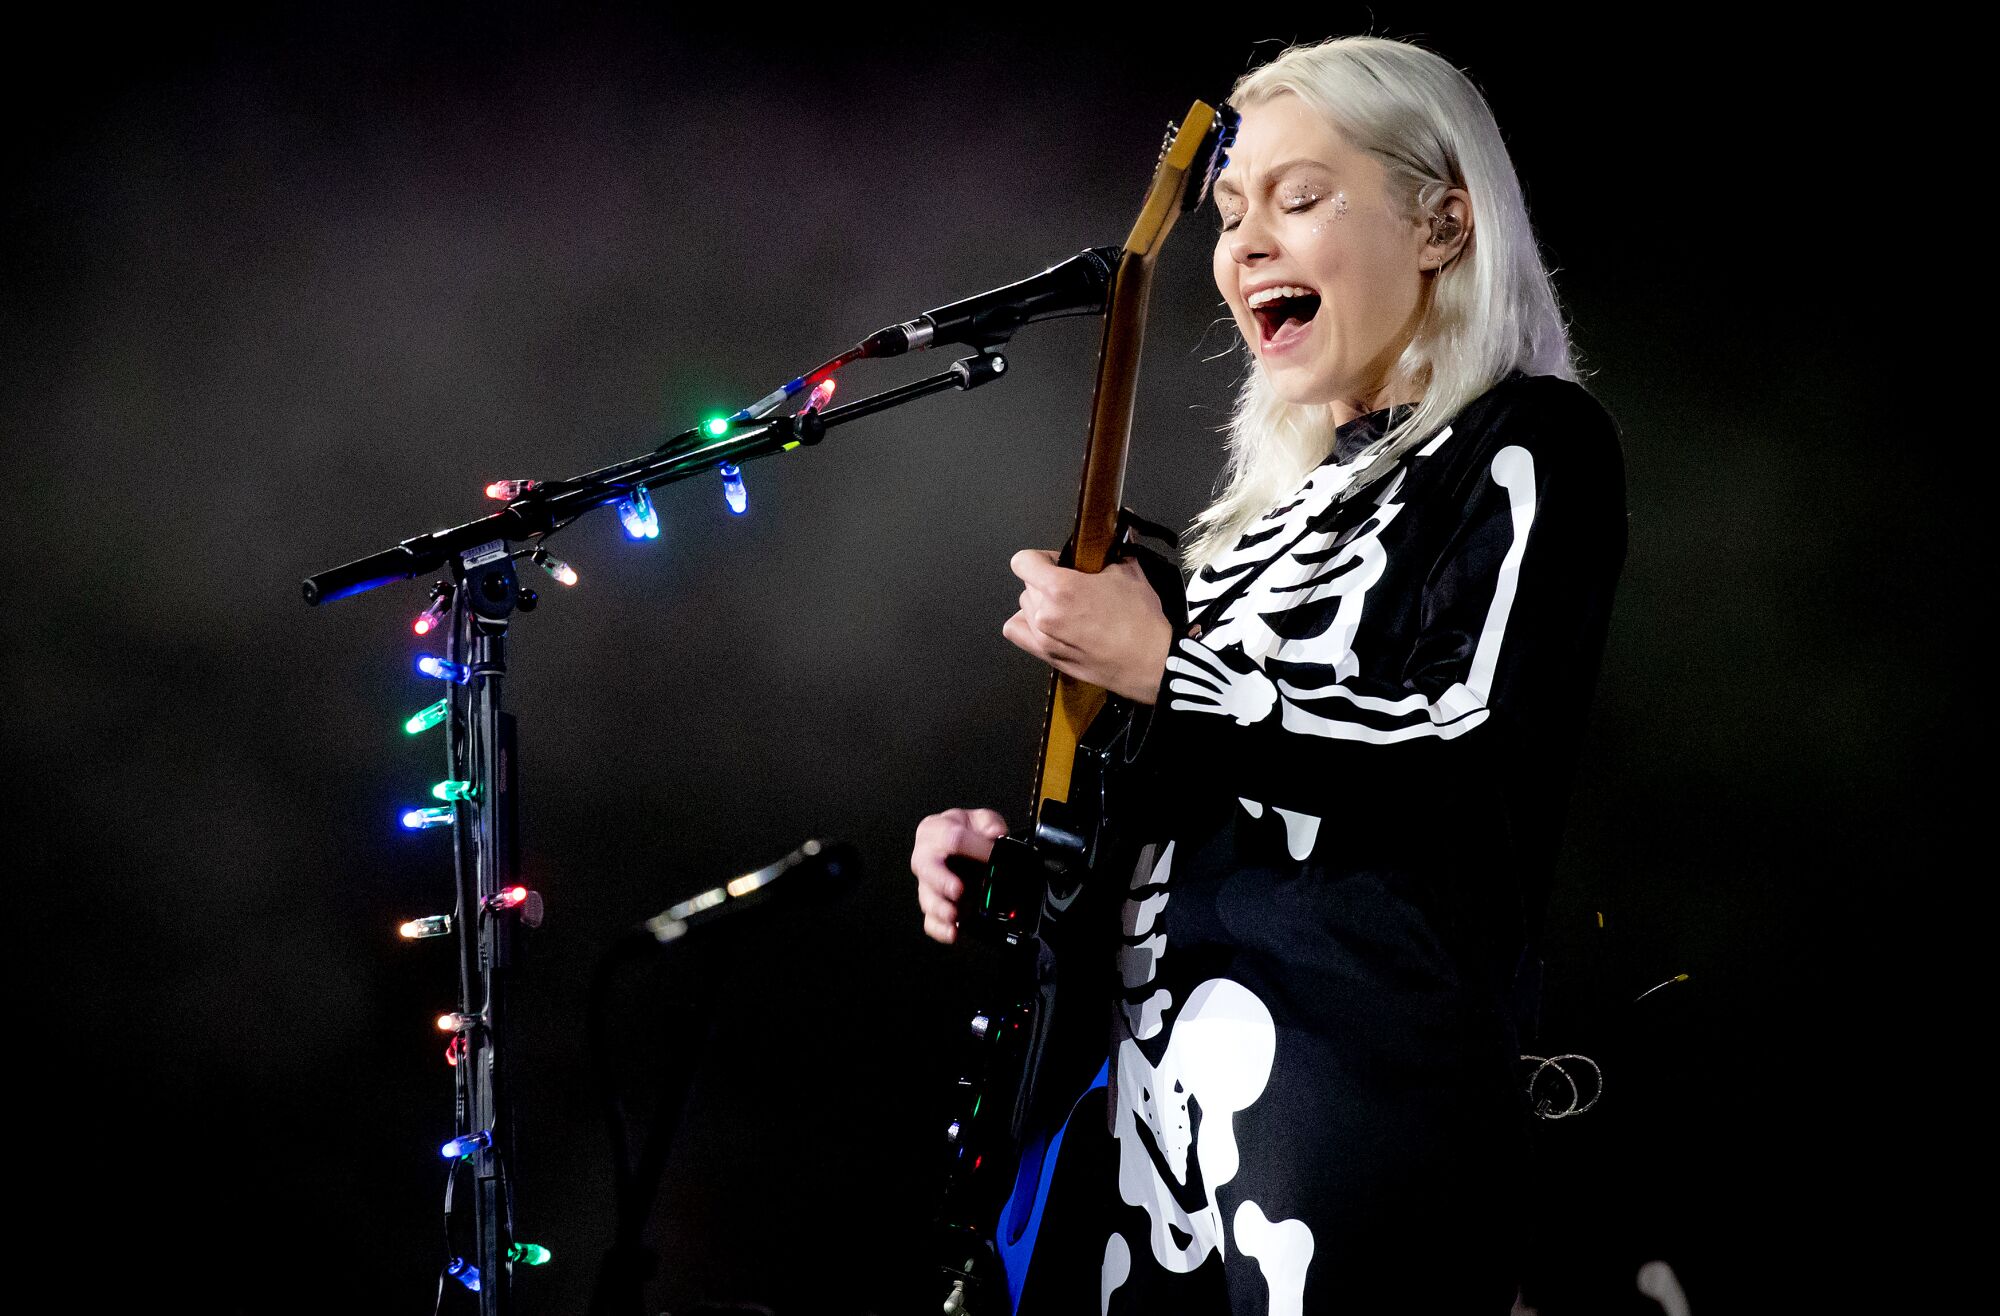 Phoebe Bridgers, dressed in a skeleton suit, plays guitar and sings into a microphone.